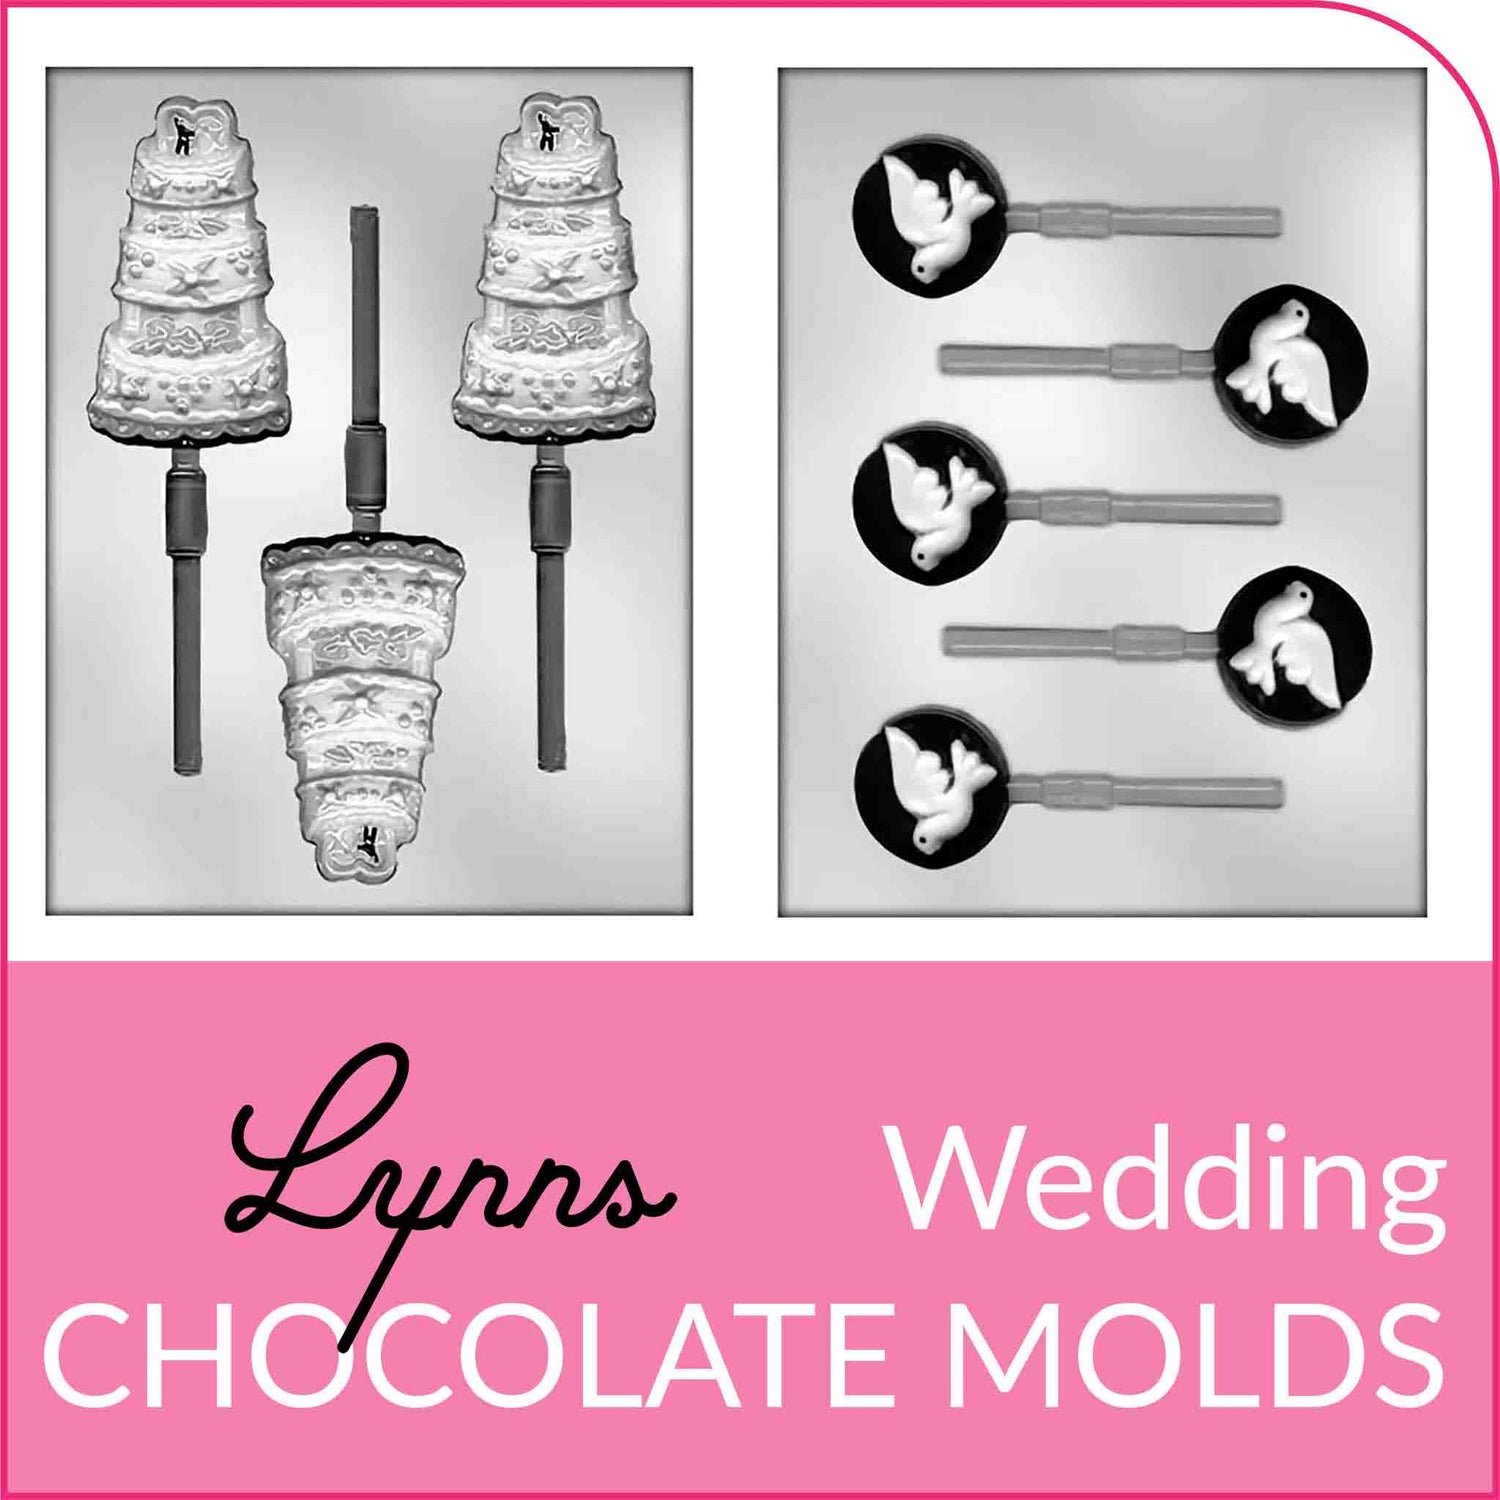 Shop Wedding Chocolate Molds and Lollipop Molds from Lynn's